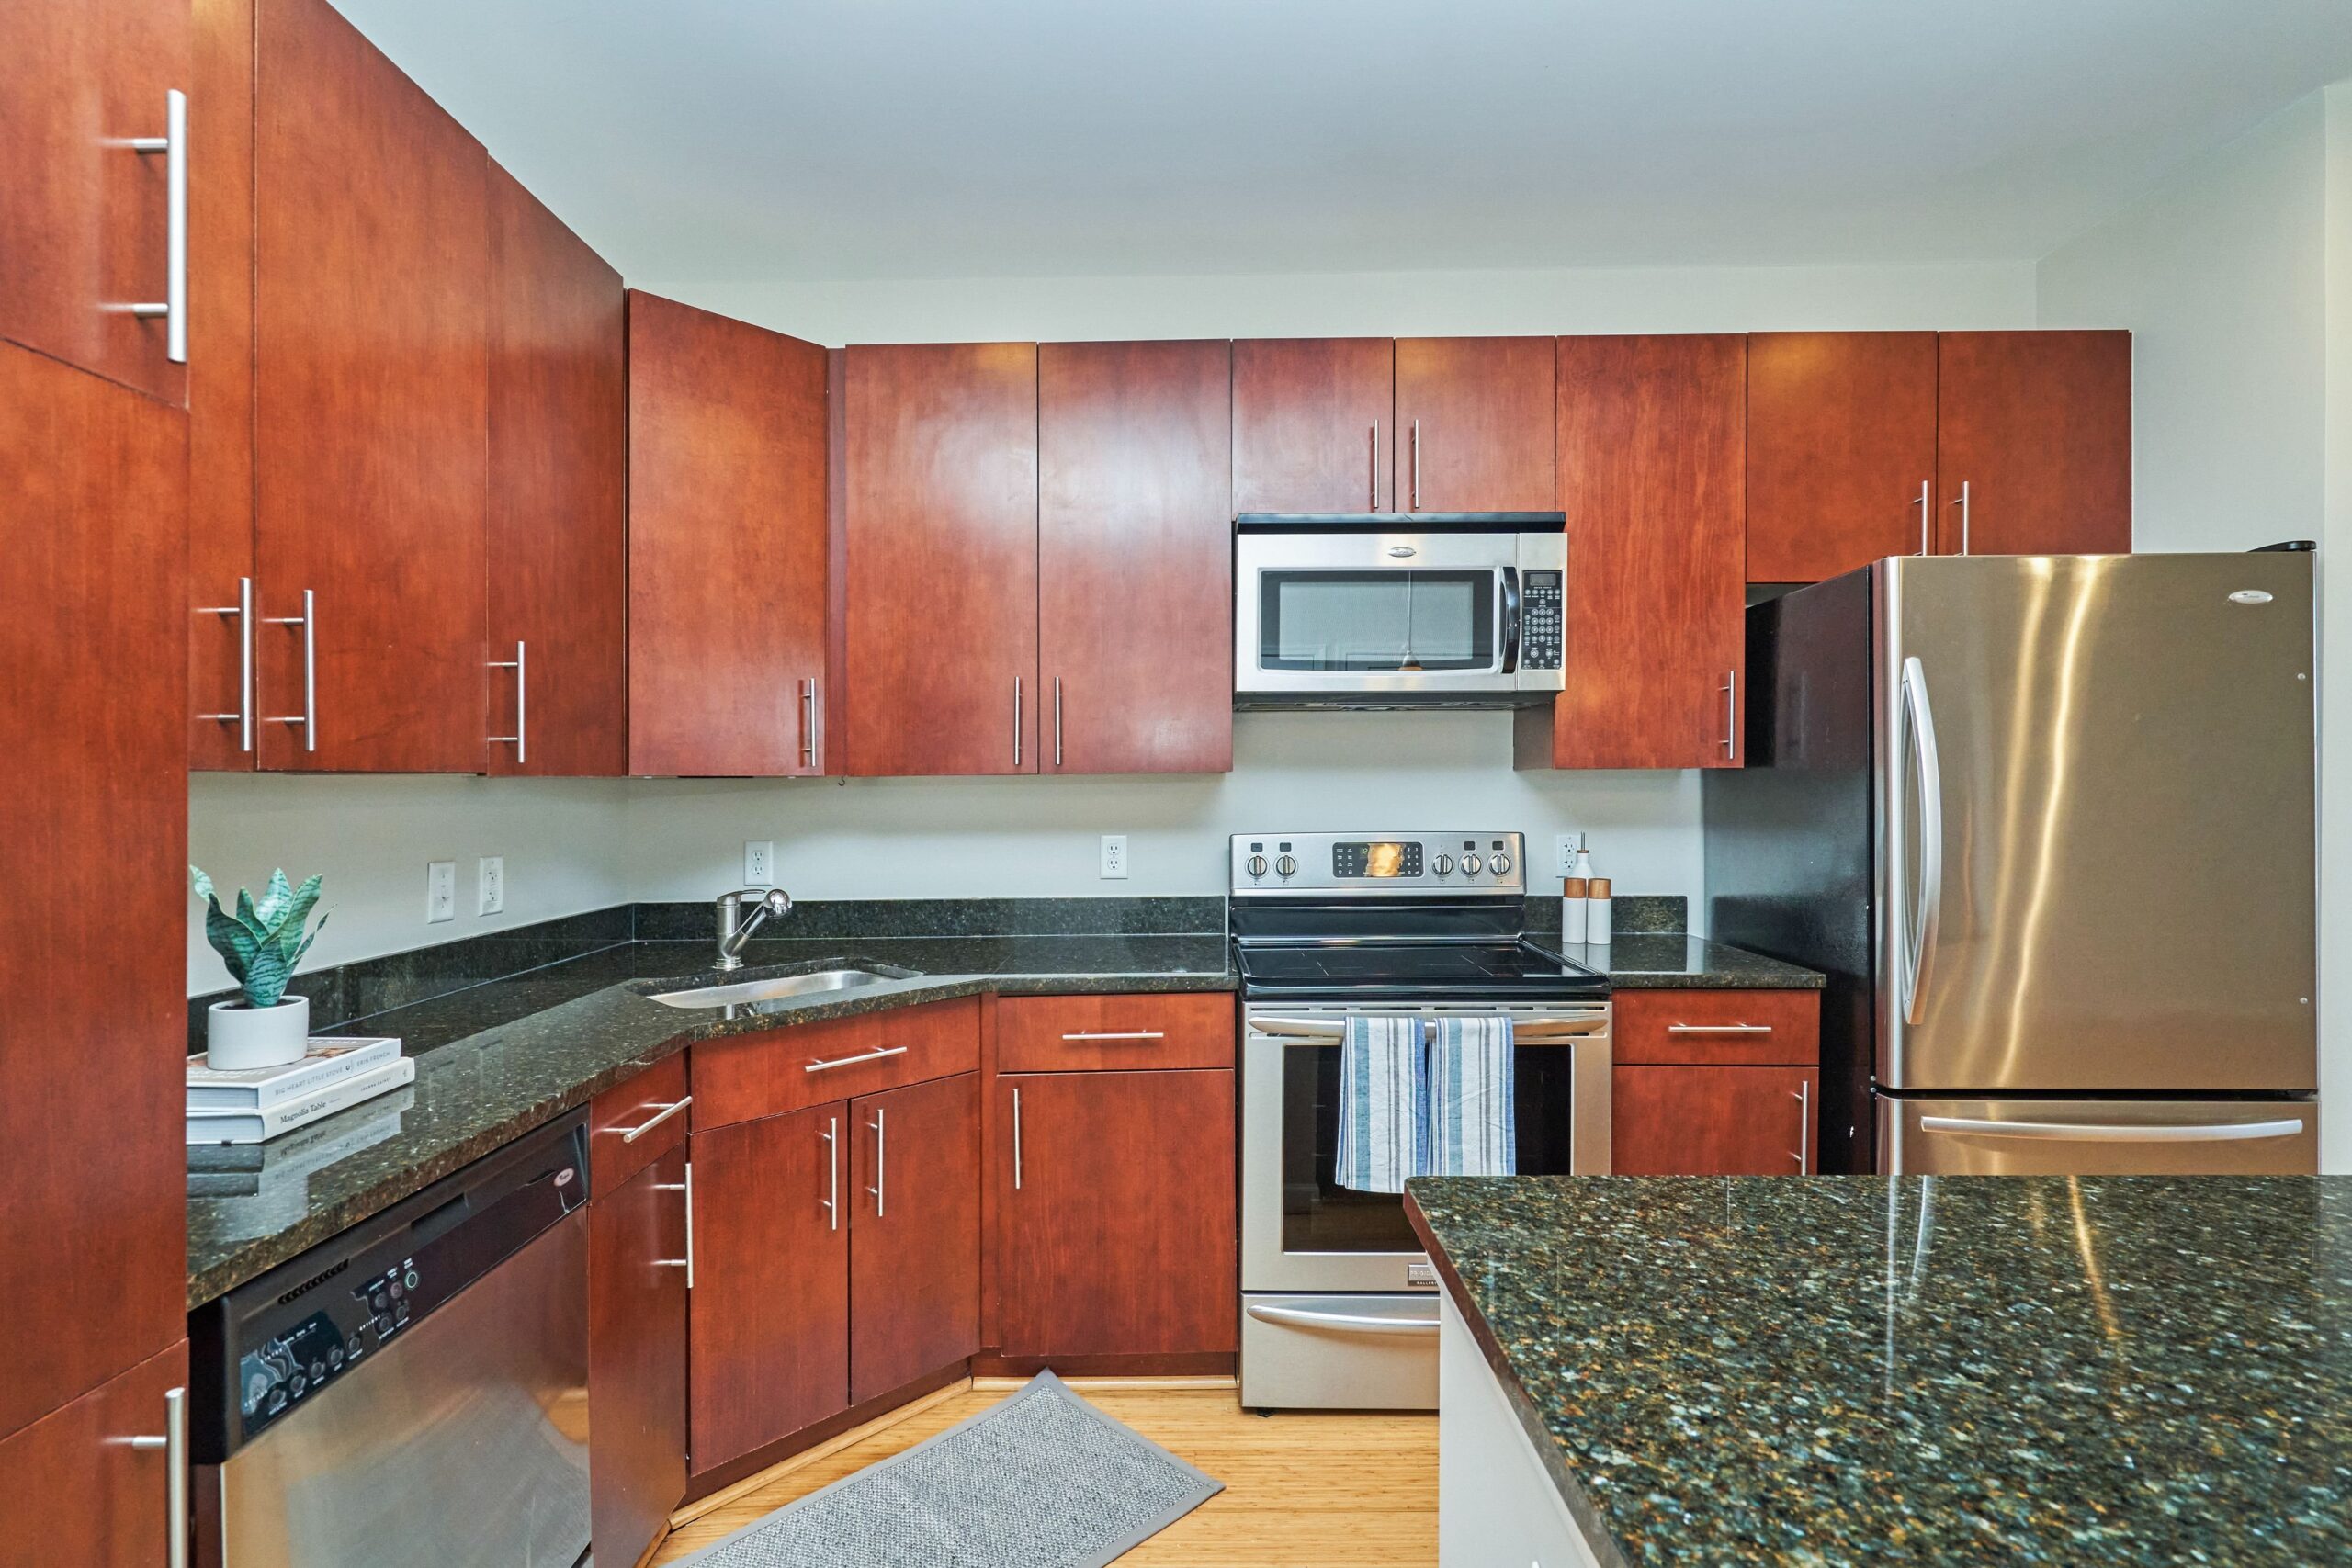 Professional interior photo of 444 W Broad St Unit 631 - showing the open kitchen with island and granite counters, stainless appliances, and lots of cupboards